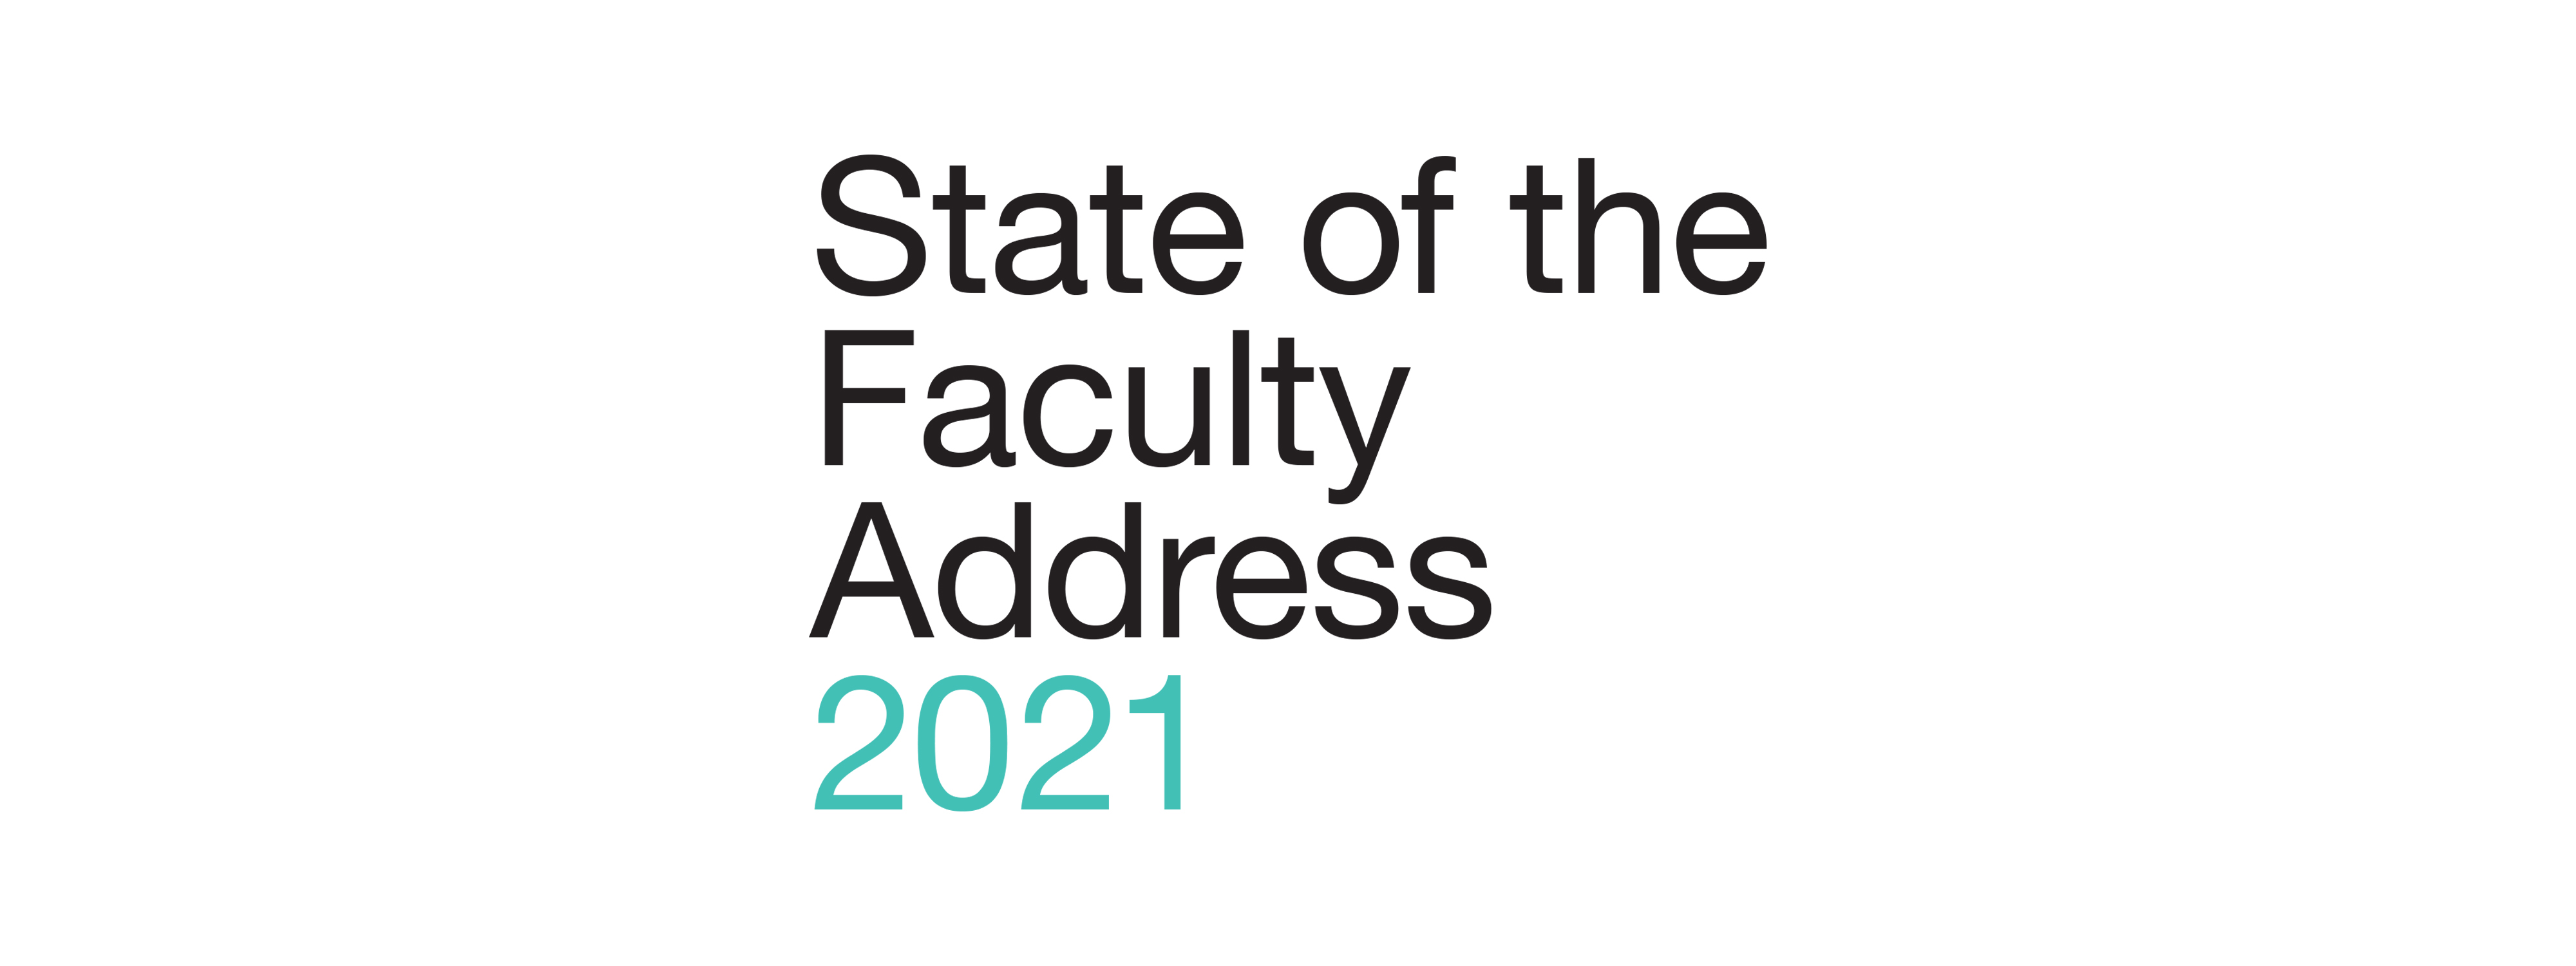 State of the Faculty Address 2021